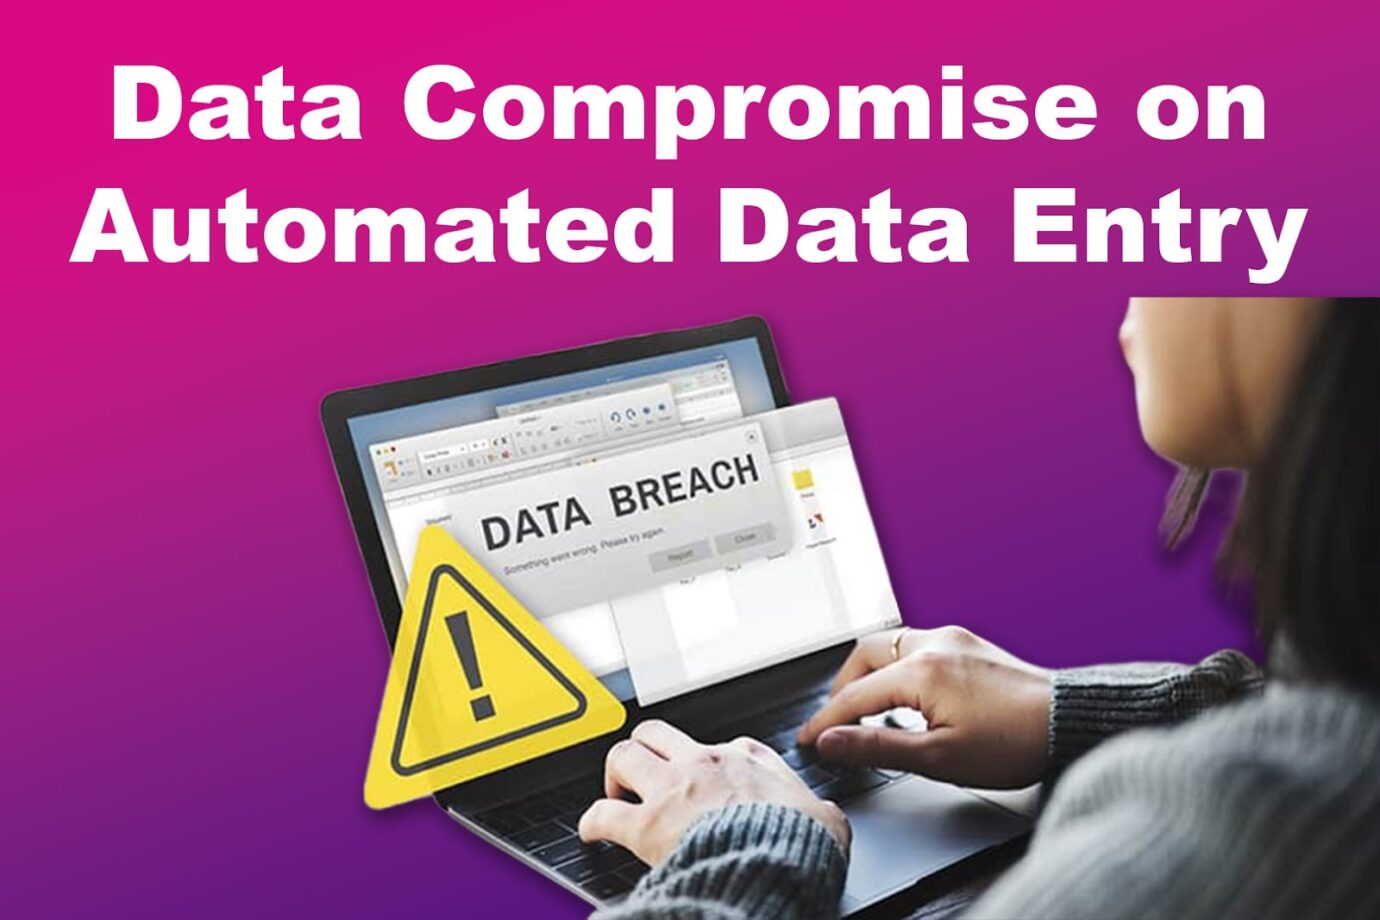 Data Compromise on Automated Data Entry